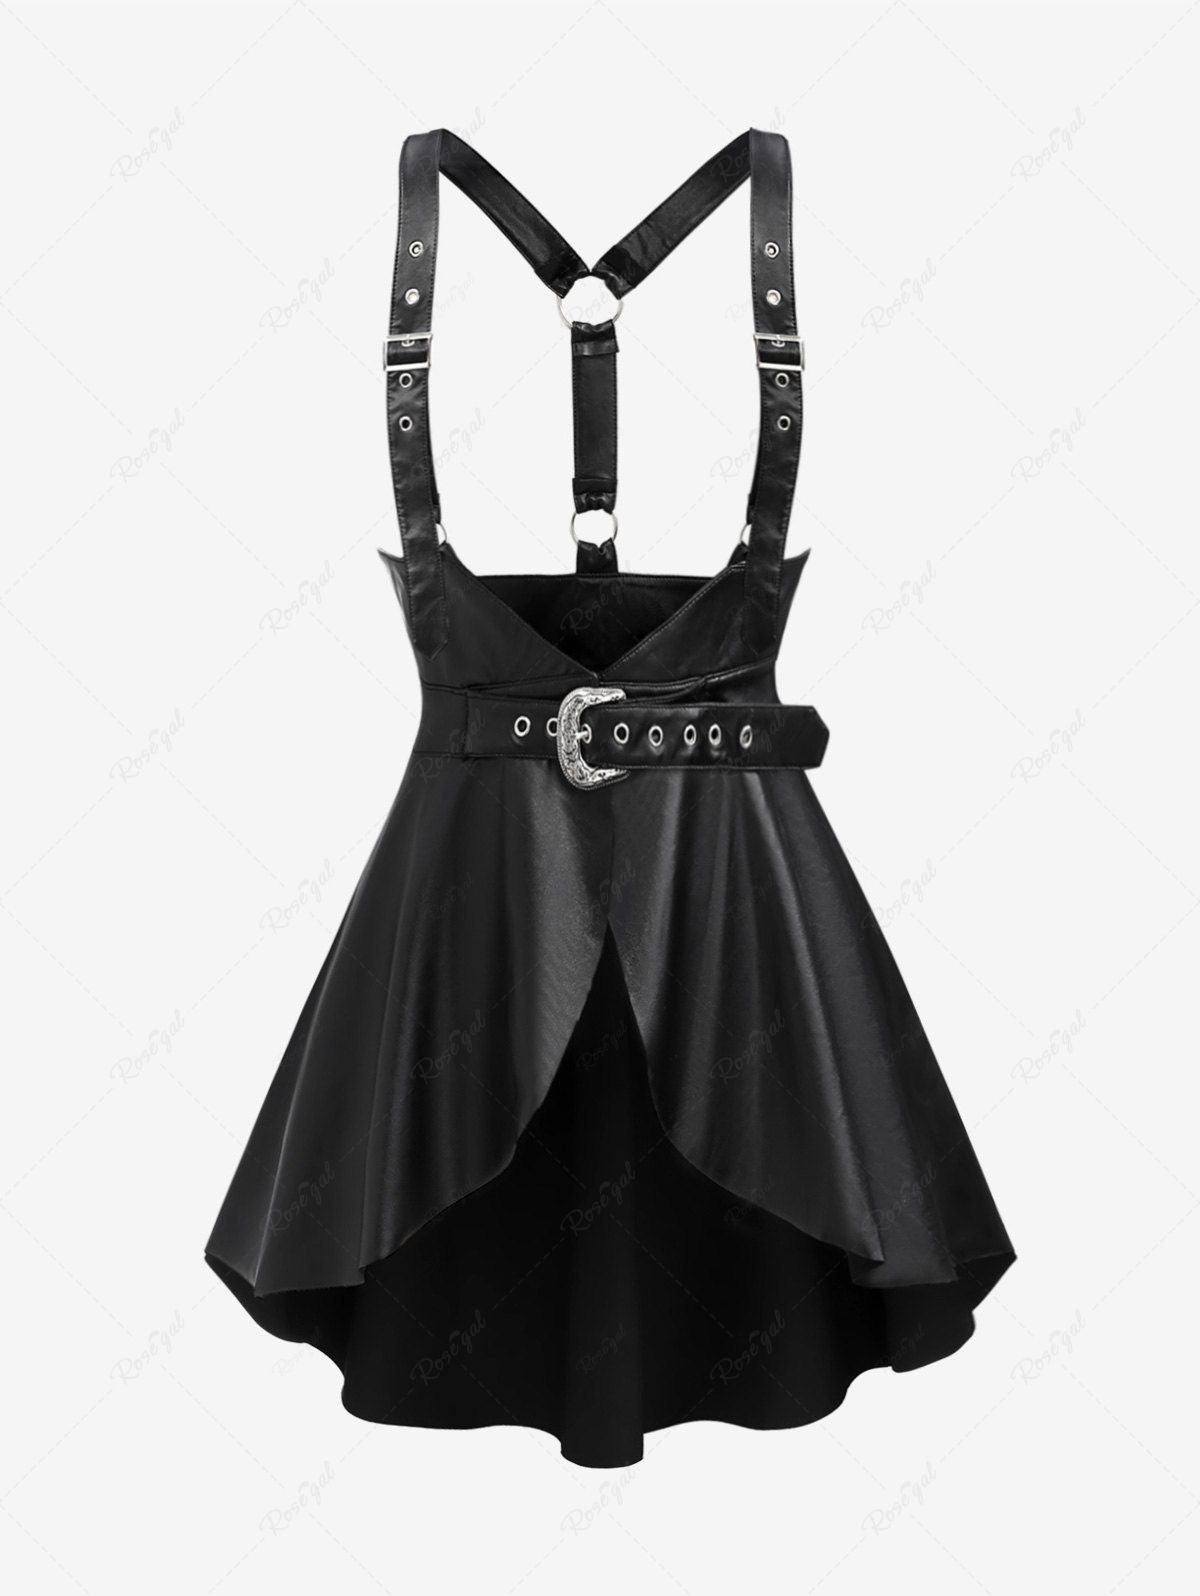 Gothic PU Panel O-Ring Buckle Grommet Asymmetric Ruched Suspender Lingerie Corset Belt